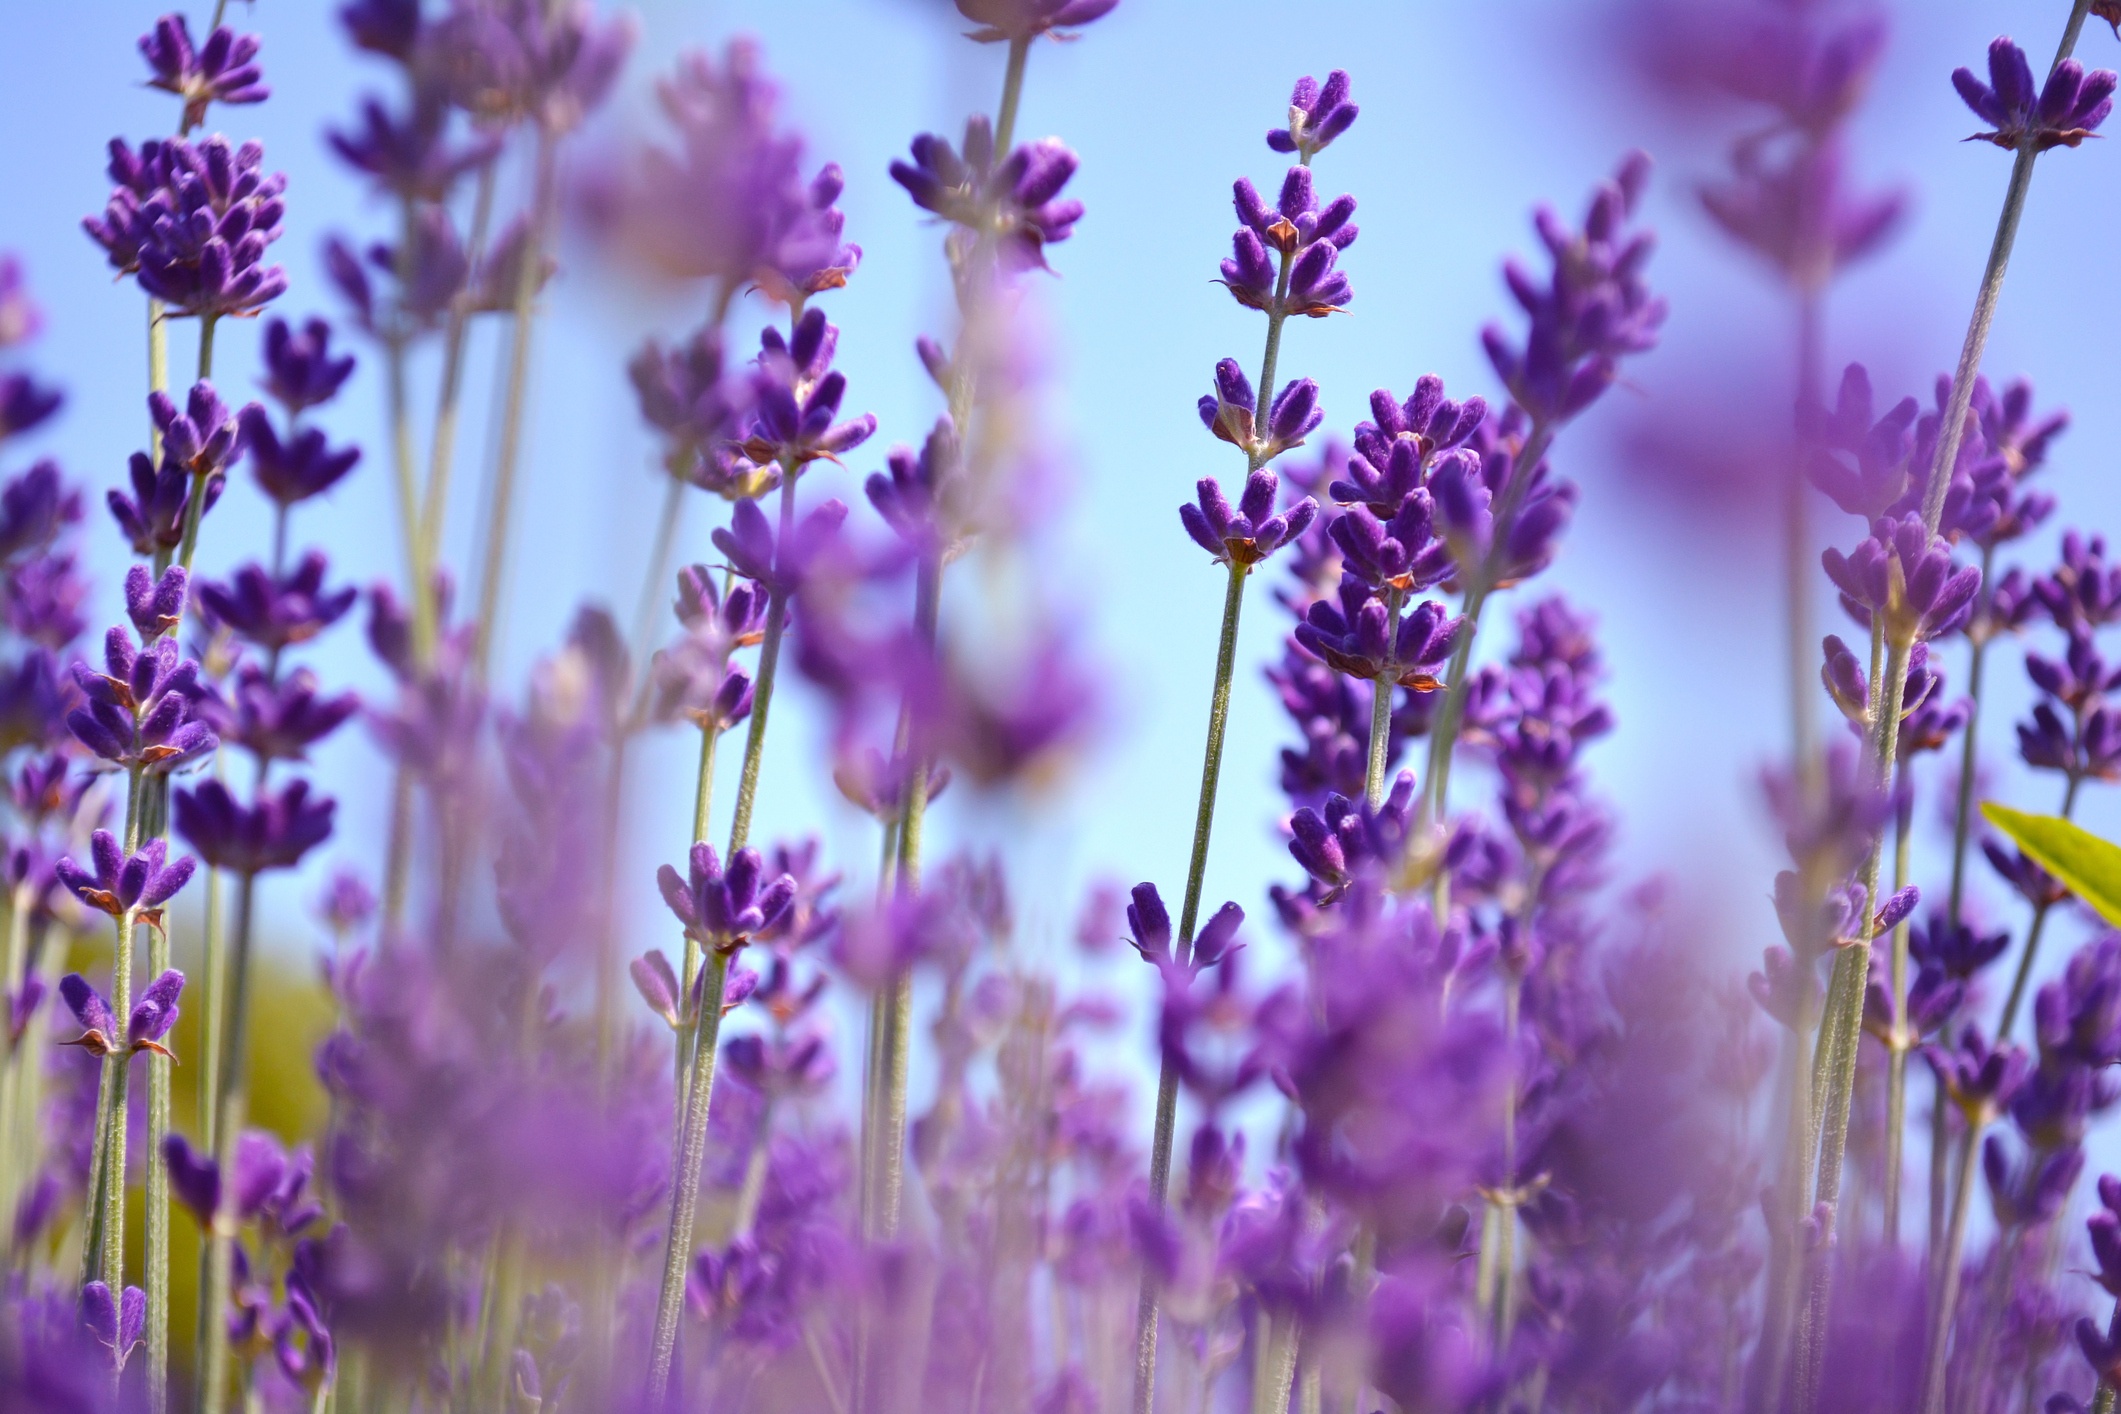 Lavender can be used to soothe your emotions.